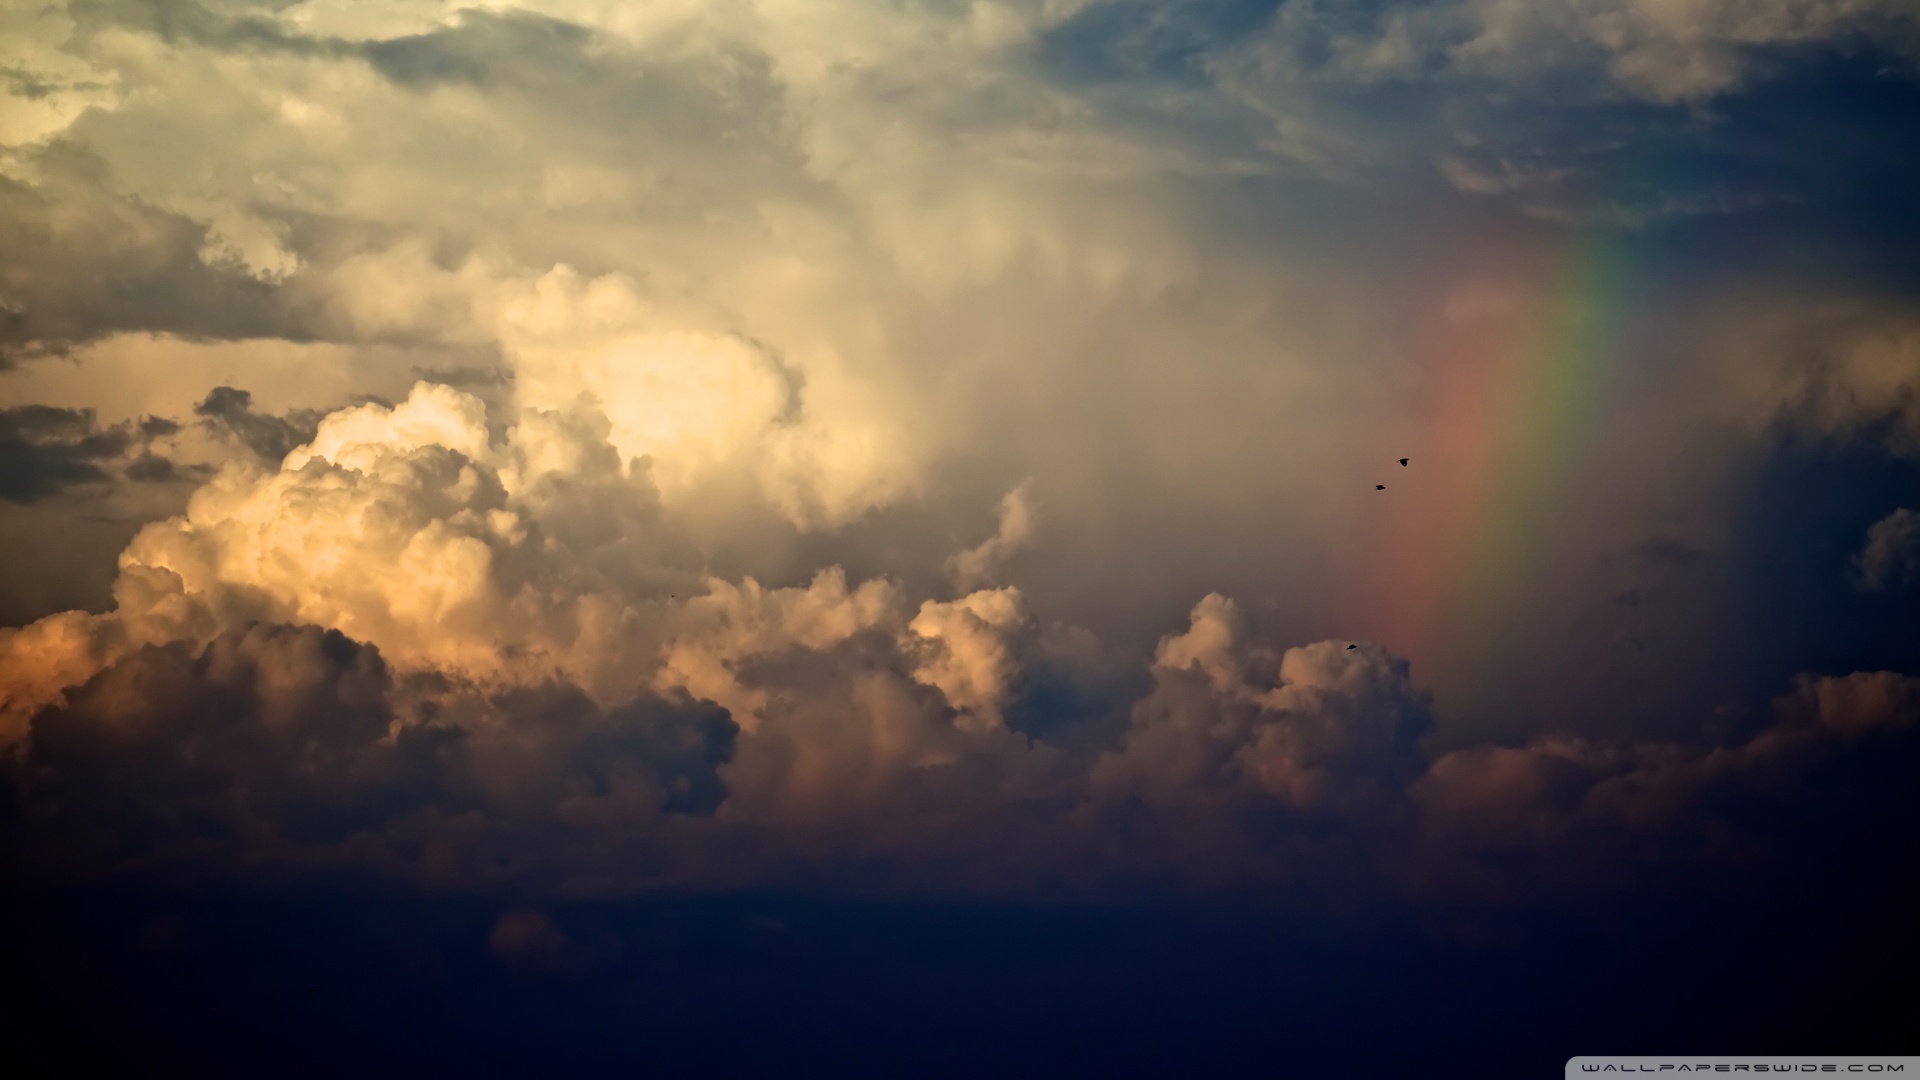 Download Storm Clouds And Rainbow Wallpaper 1920x1080